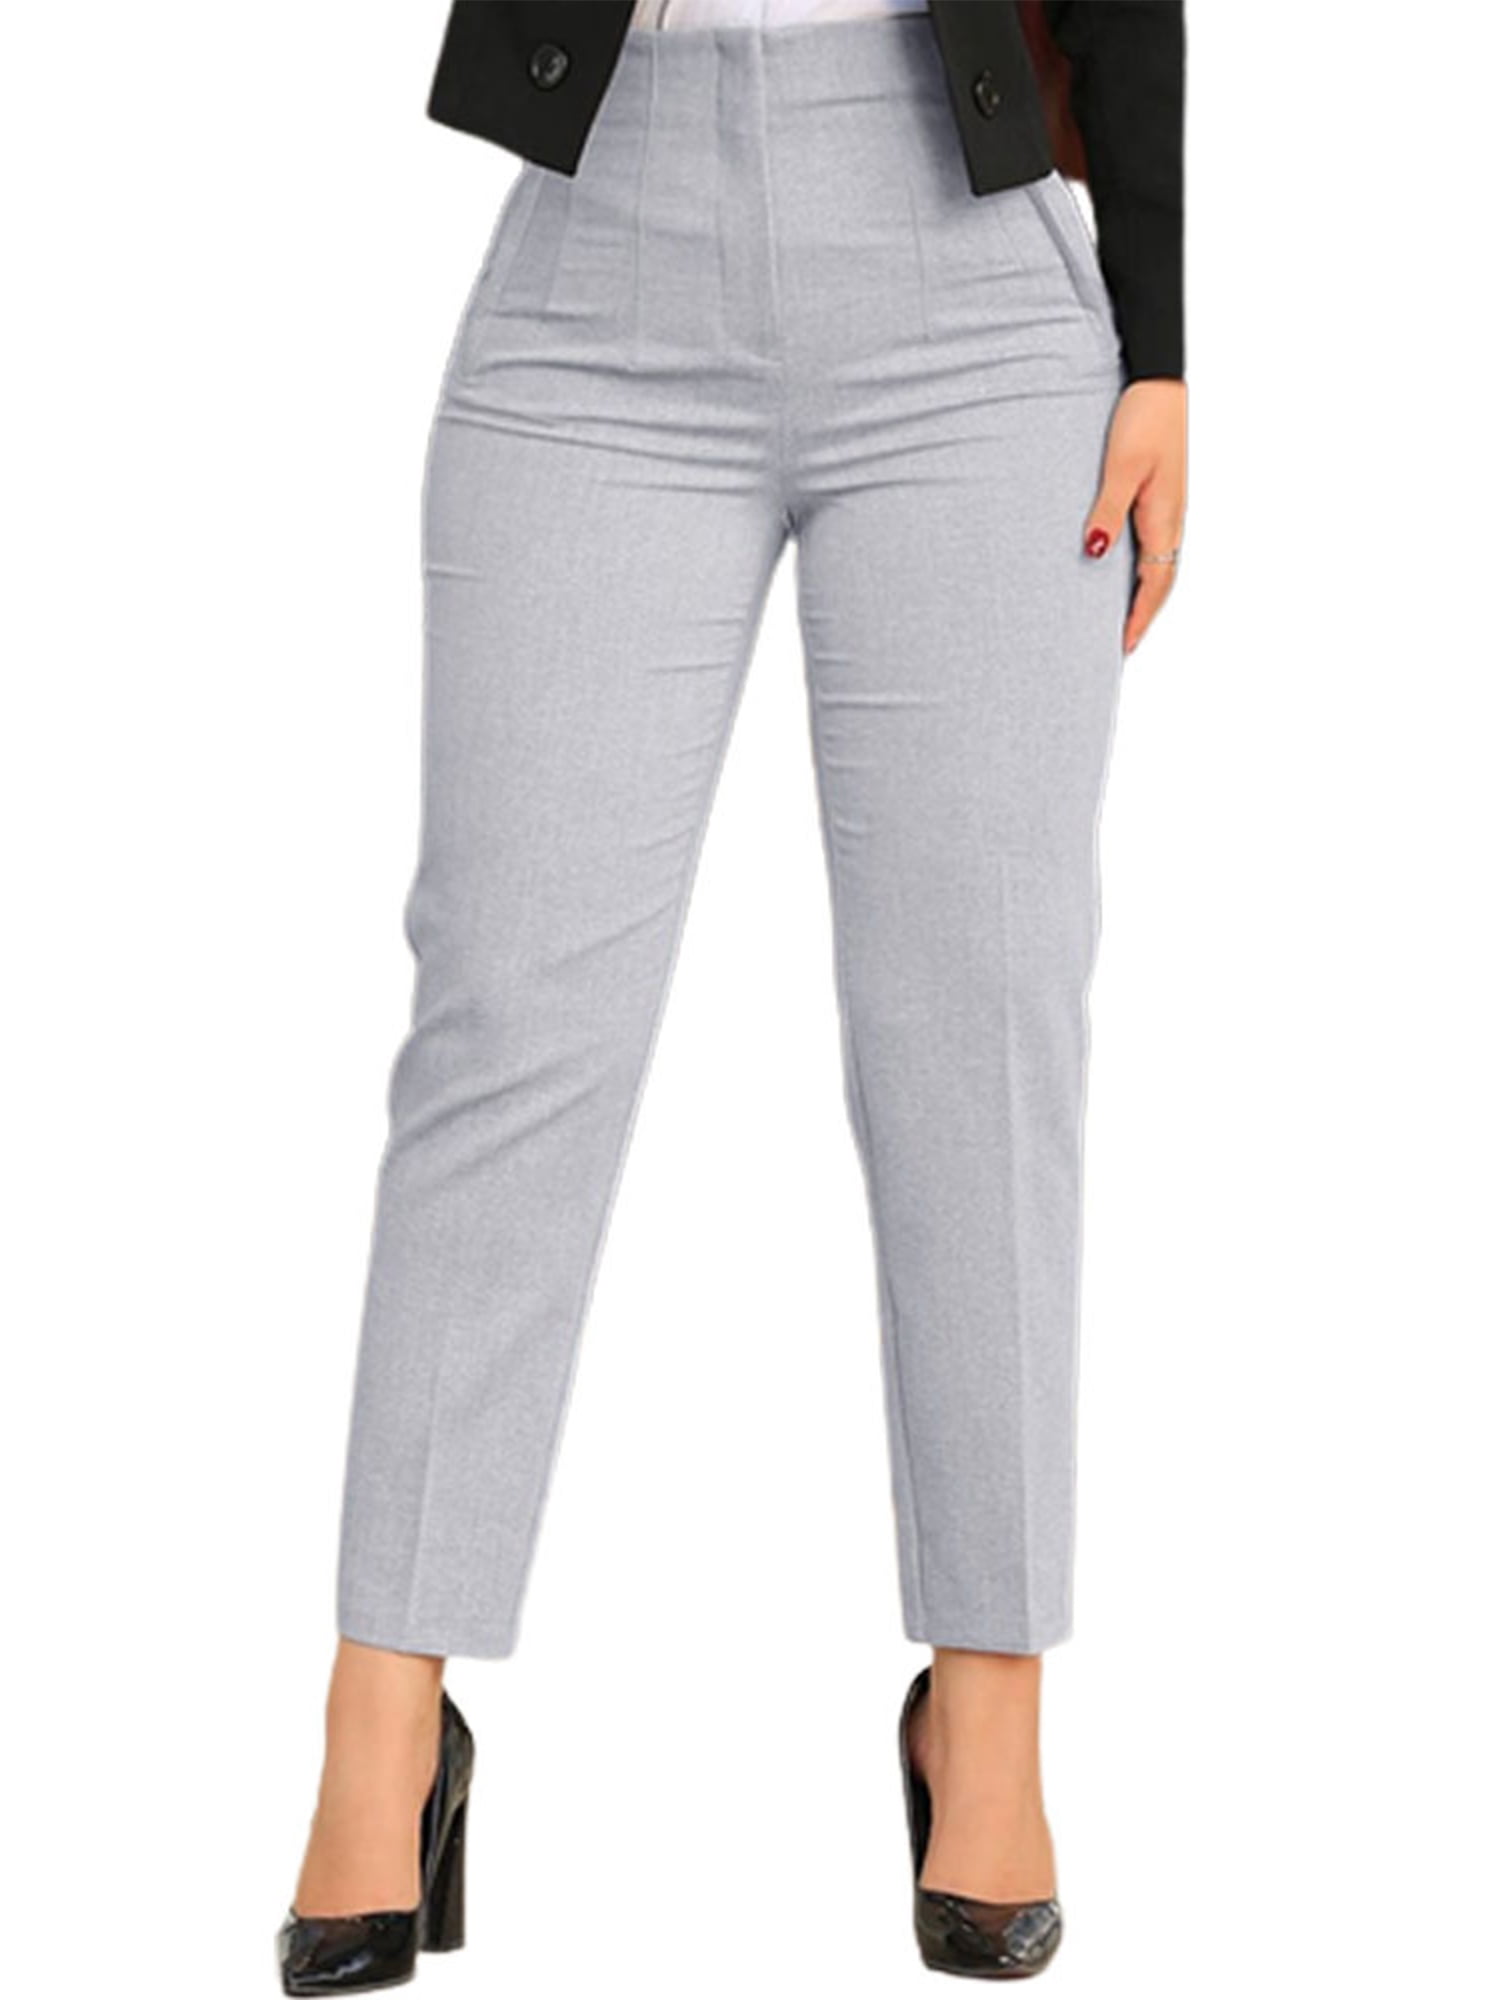 MYOURSA Women's Work Leggings Skinny Stretch Business Casual Dress Pants  with Pockets (Grey, Small) at  Women's Clothing store